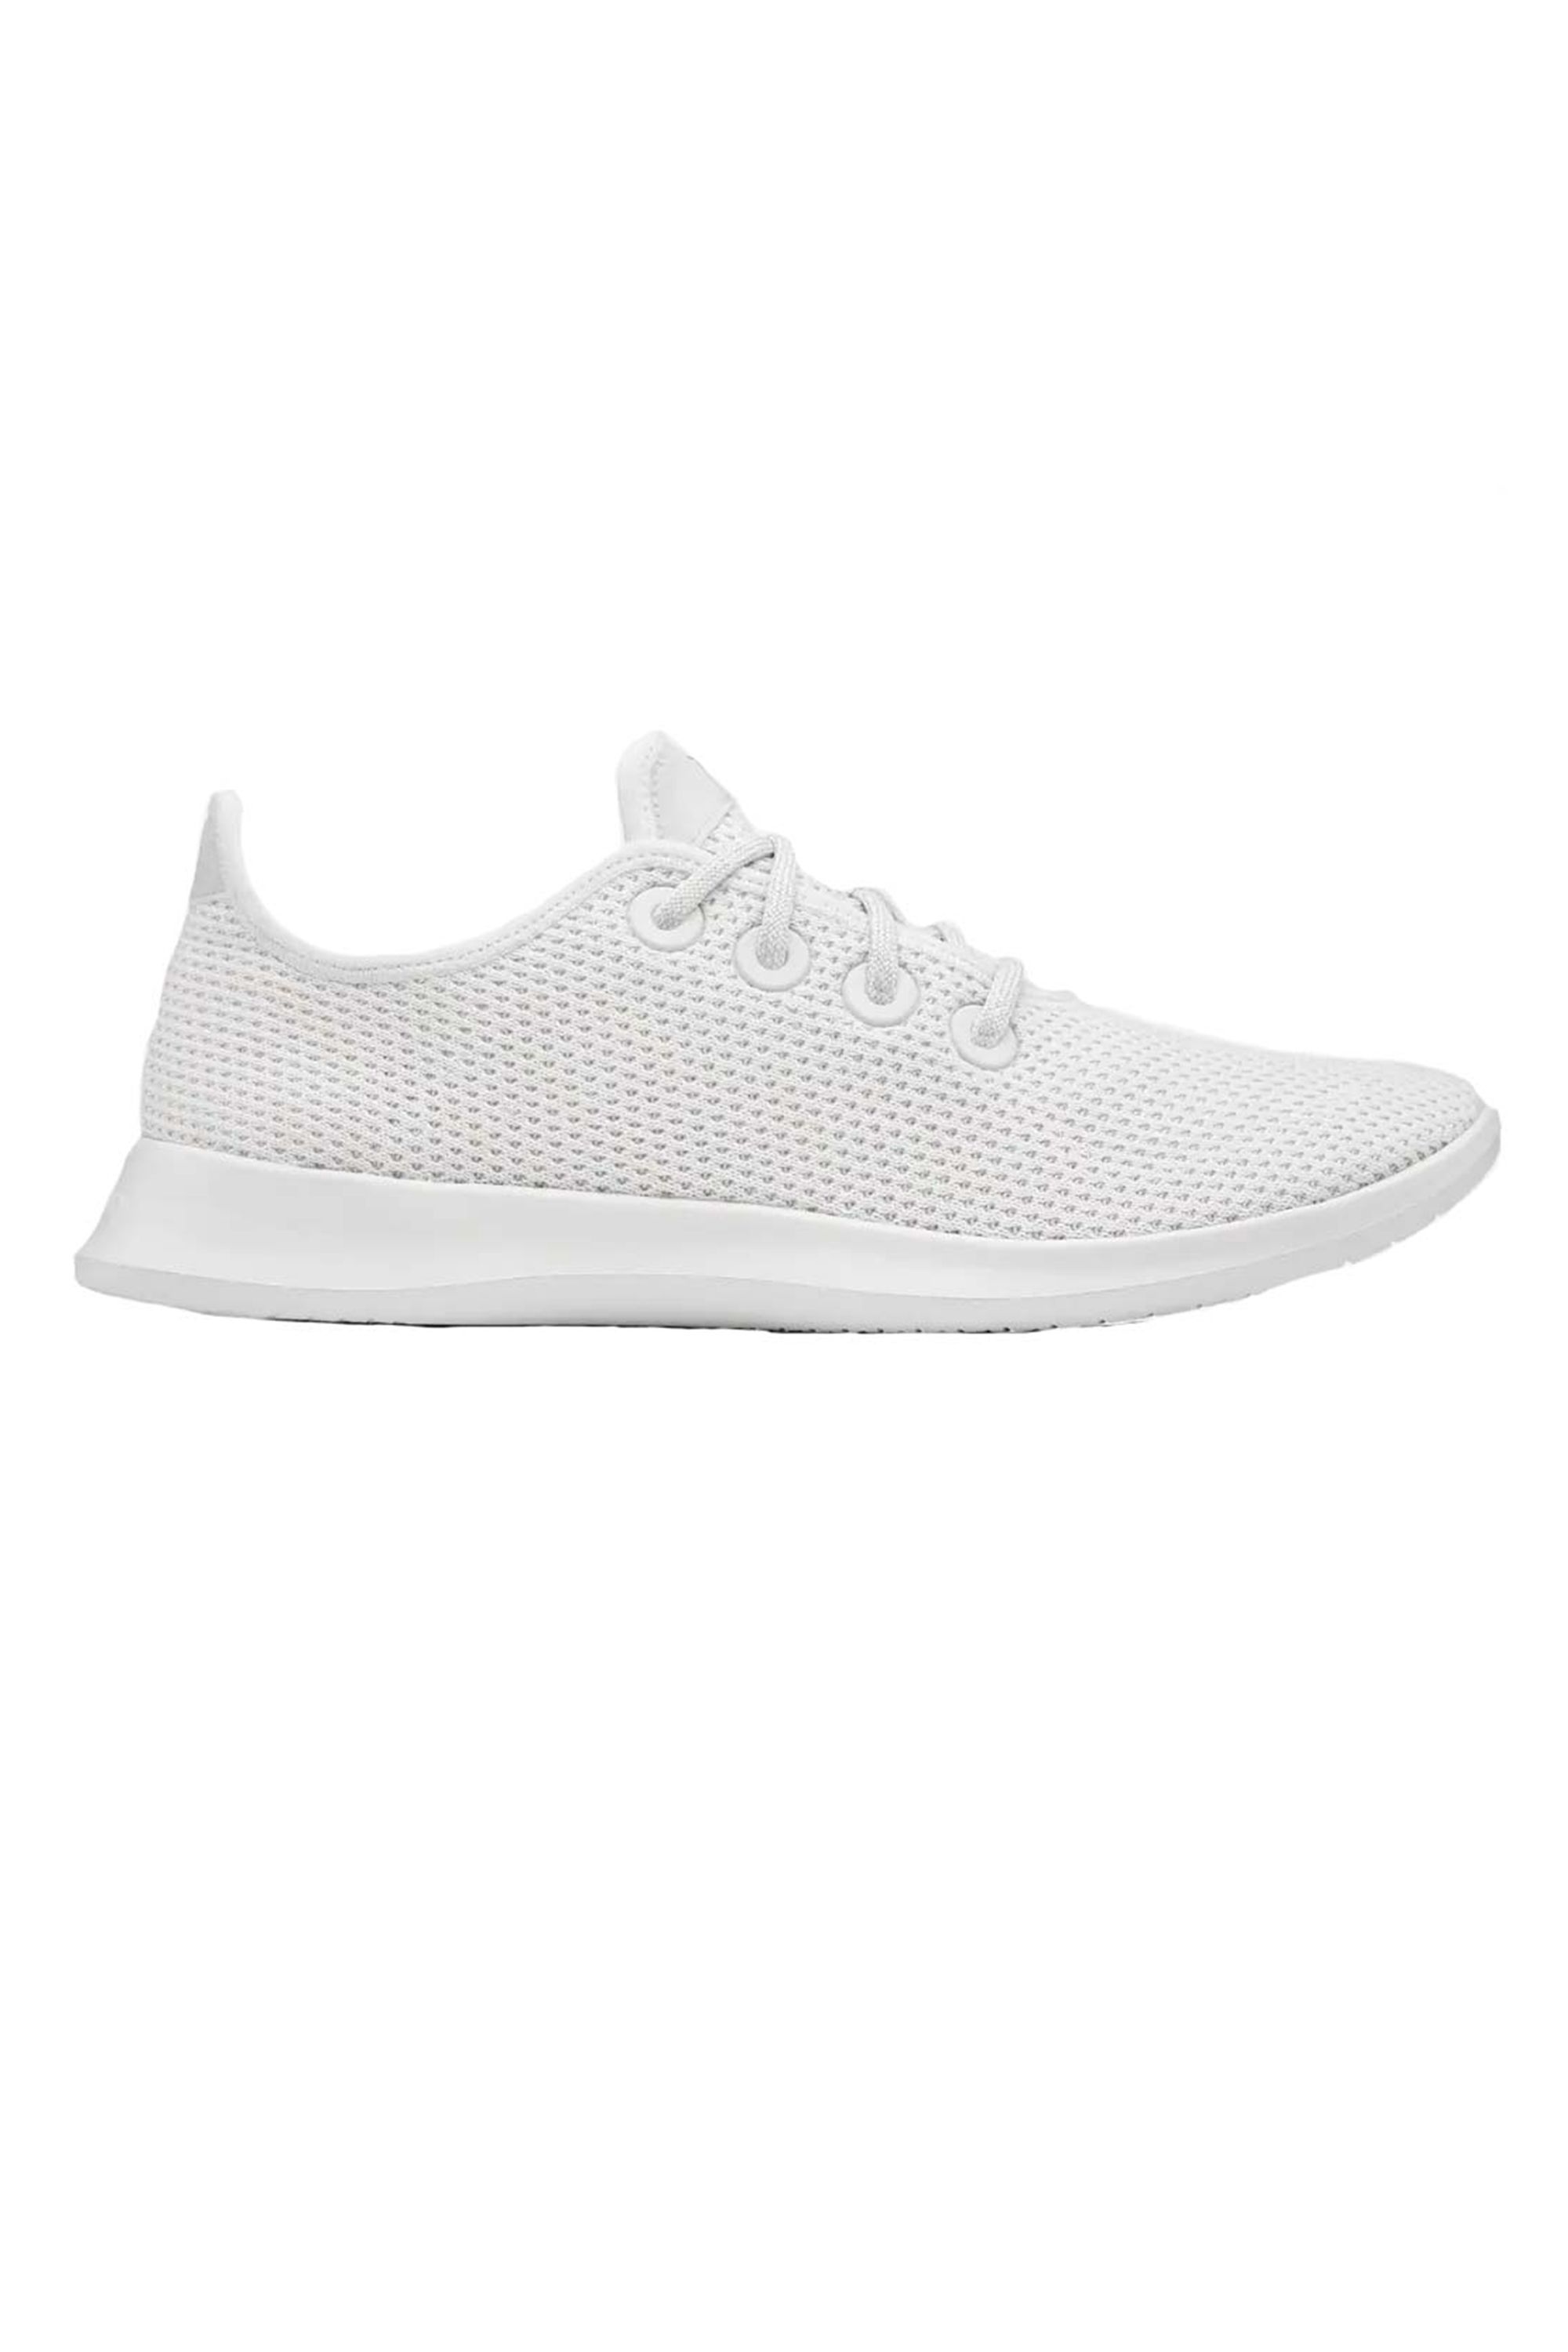 19 Best White Sneakers for 2021 